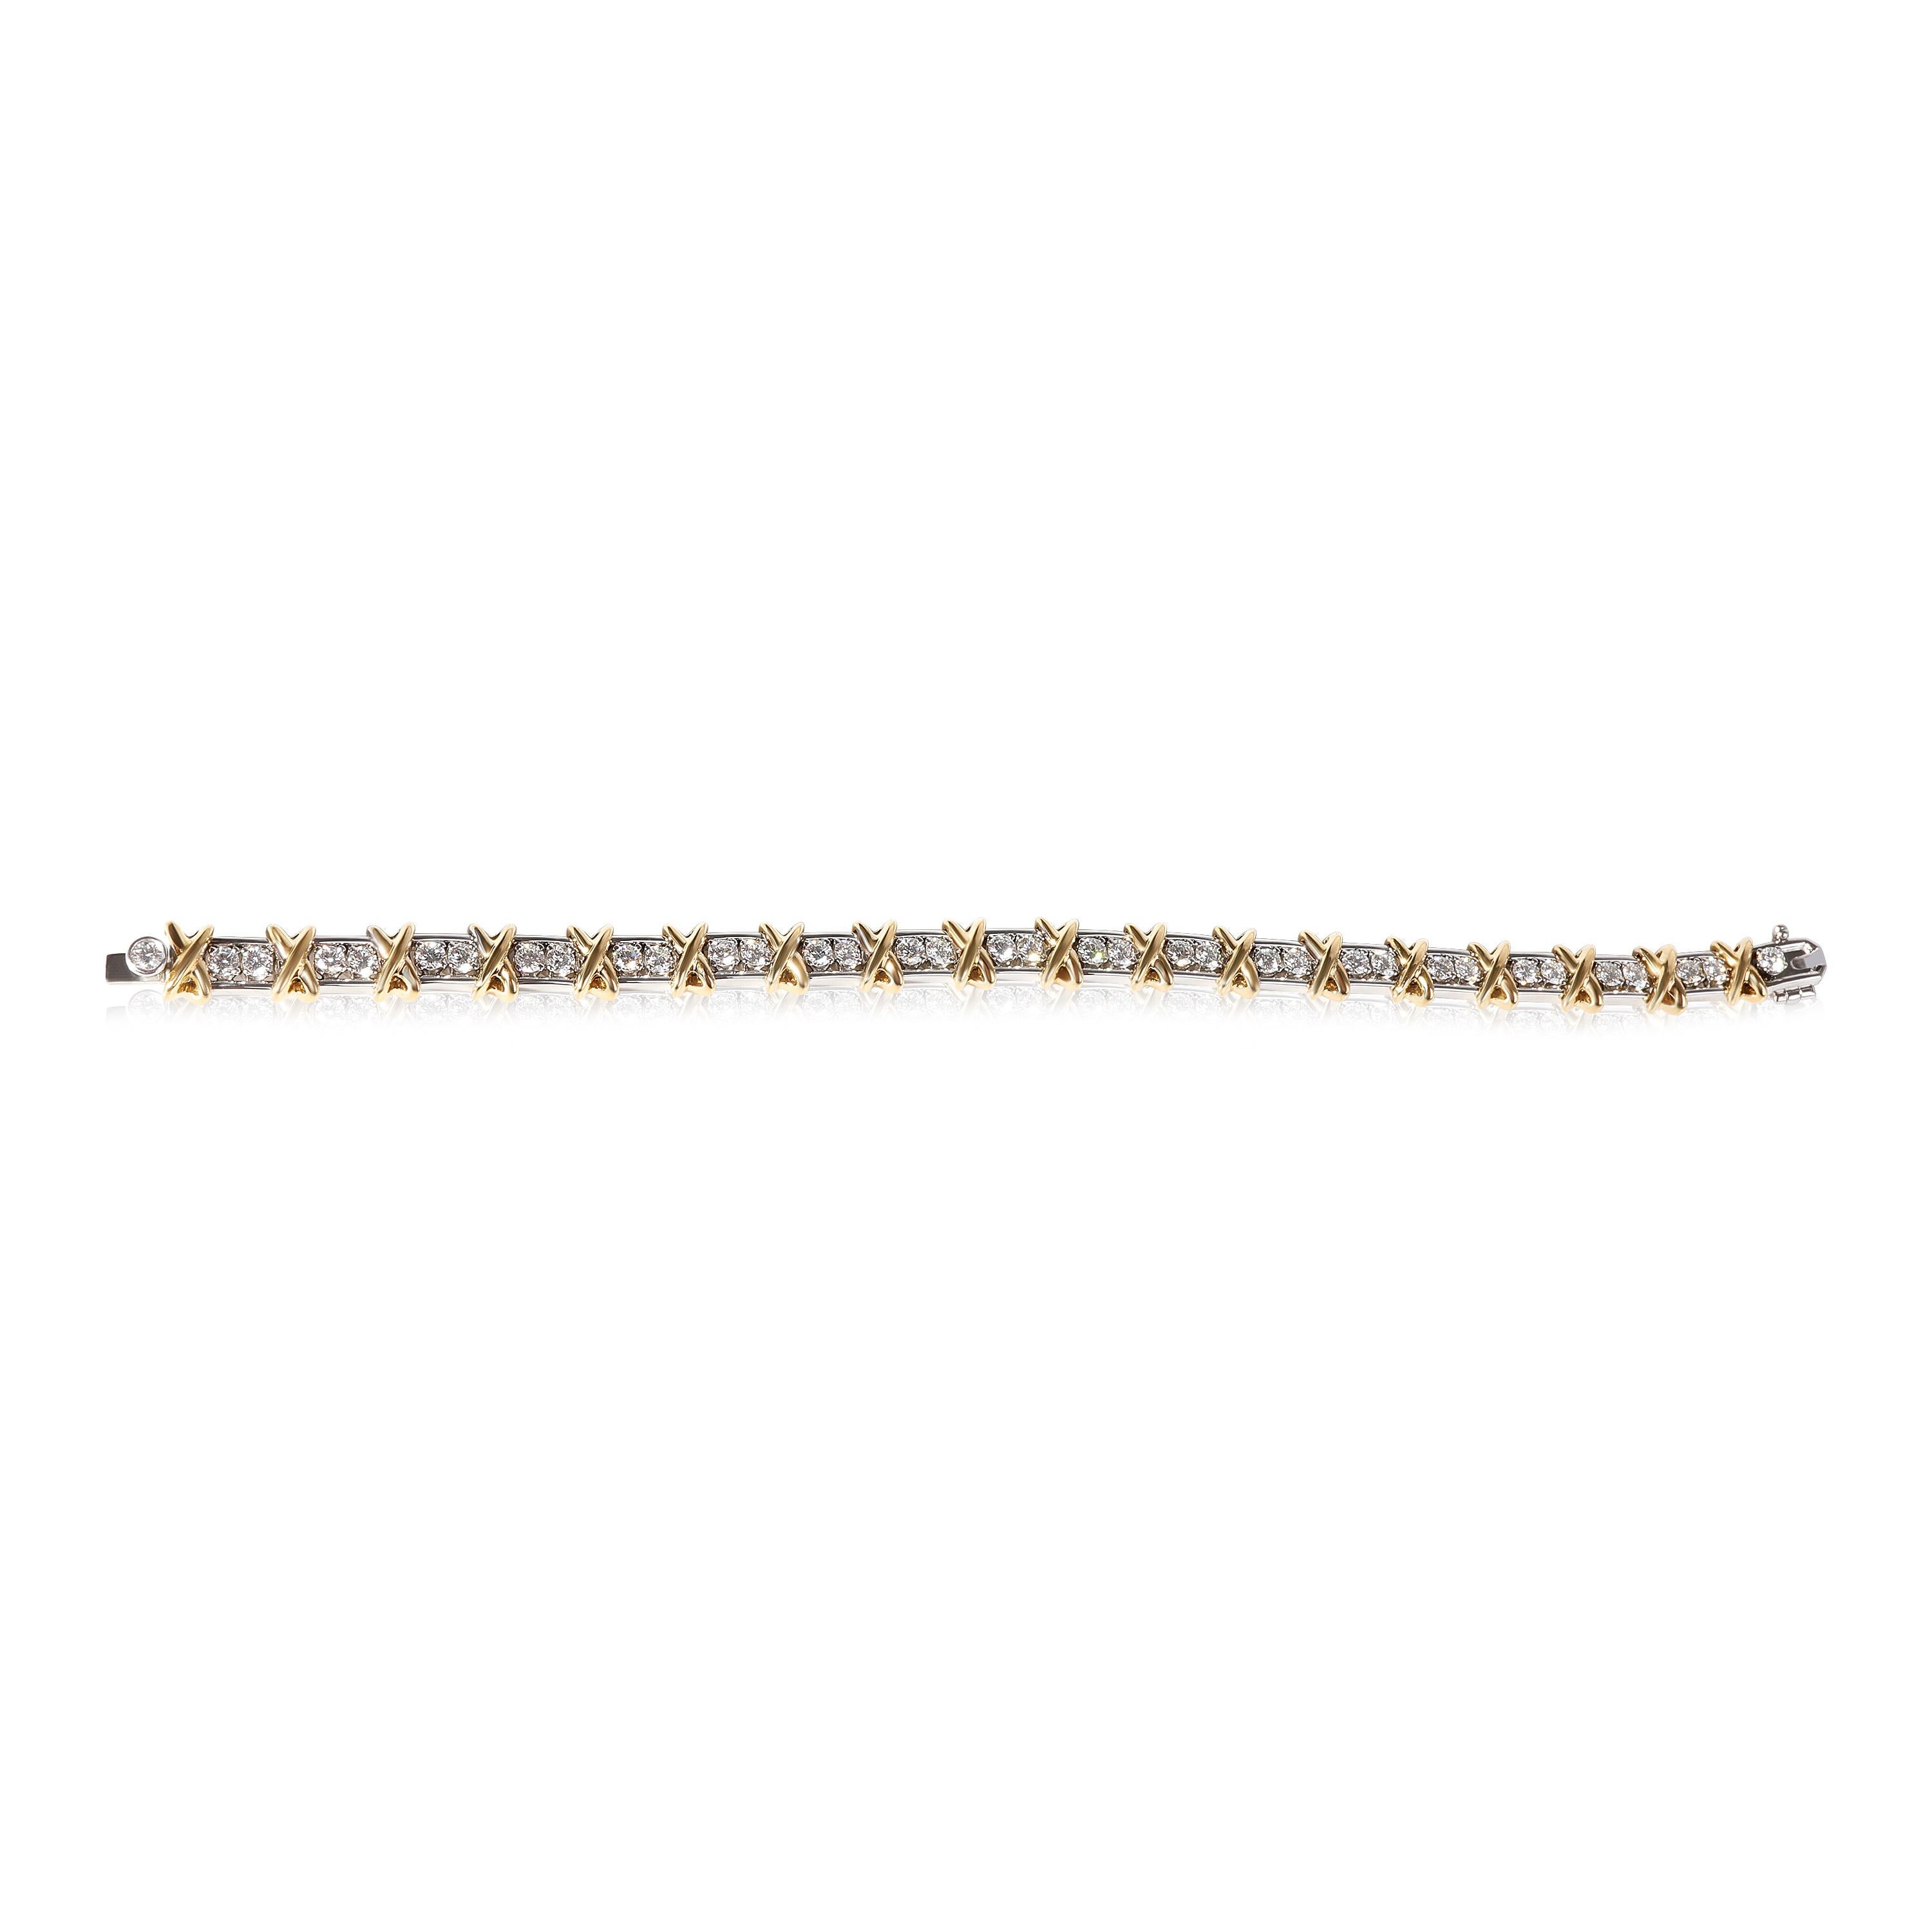 Tiffany & Co. Schlumberger Diamond Bracelet in 18k Yellow Gold/Platinum 2.95 CTW

PRIMARY DETAILS
SKU: 119654
Listing Title: Tiffany & Co. Schlumberger Diamond Bracelet in 18k Yellow Gold/Platinum 2.95 CTW
Condition Description: Retails for 38000